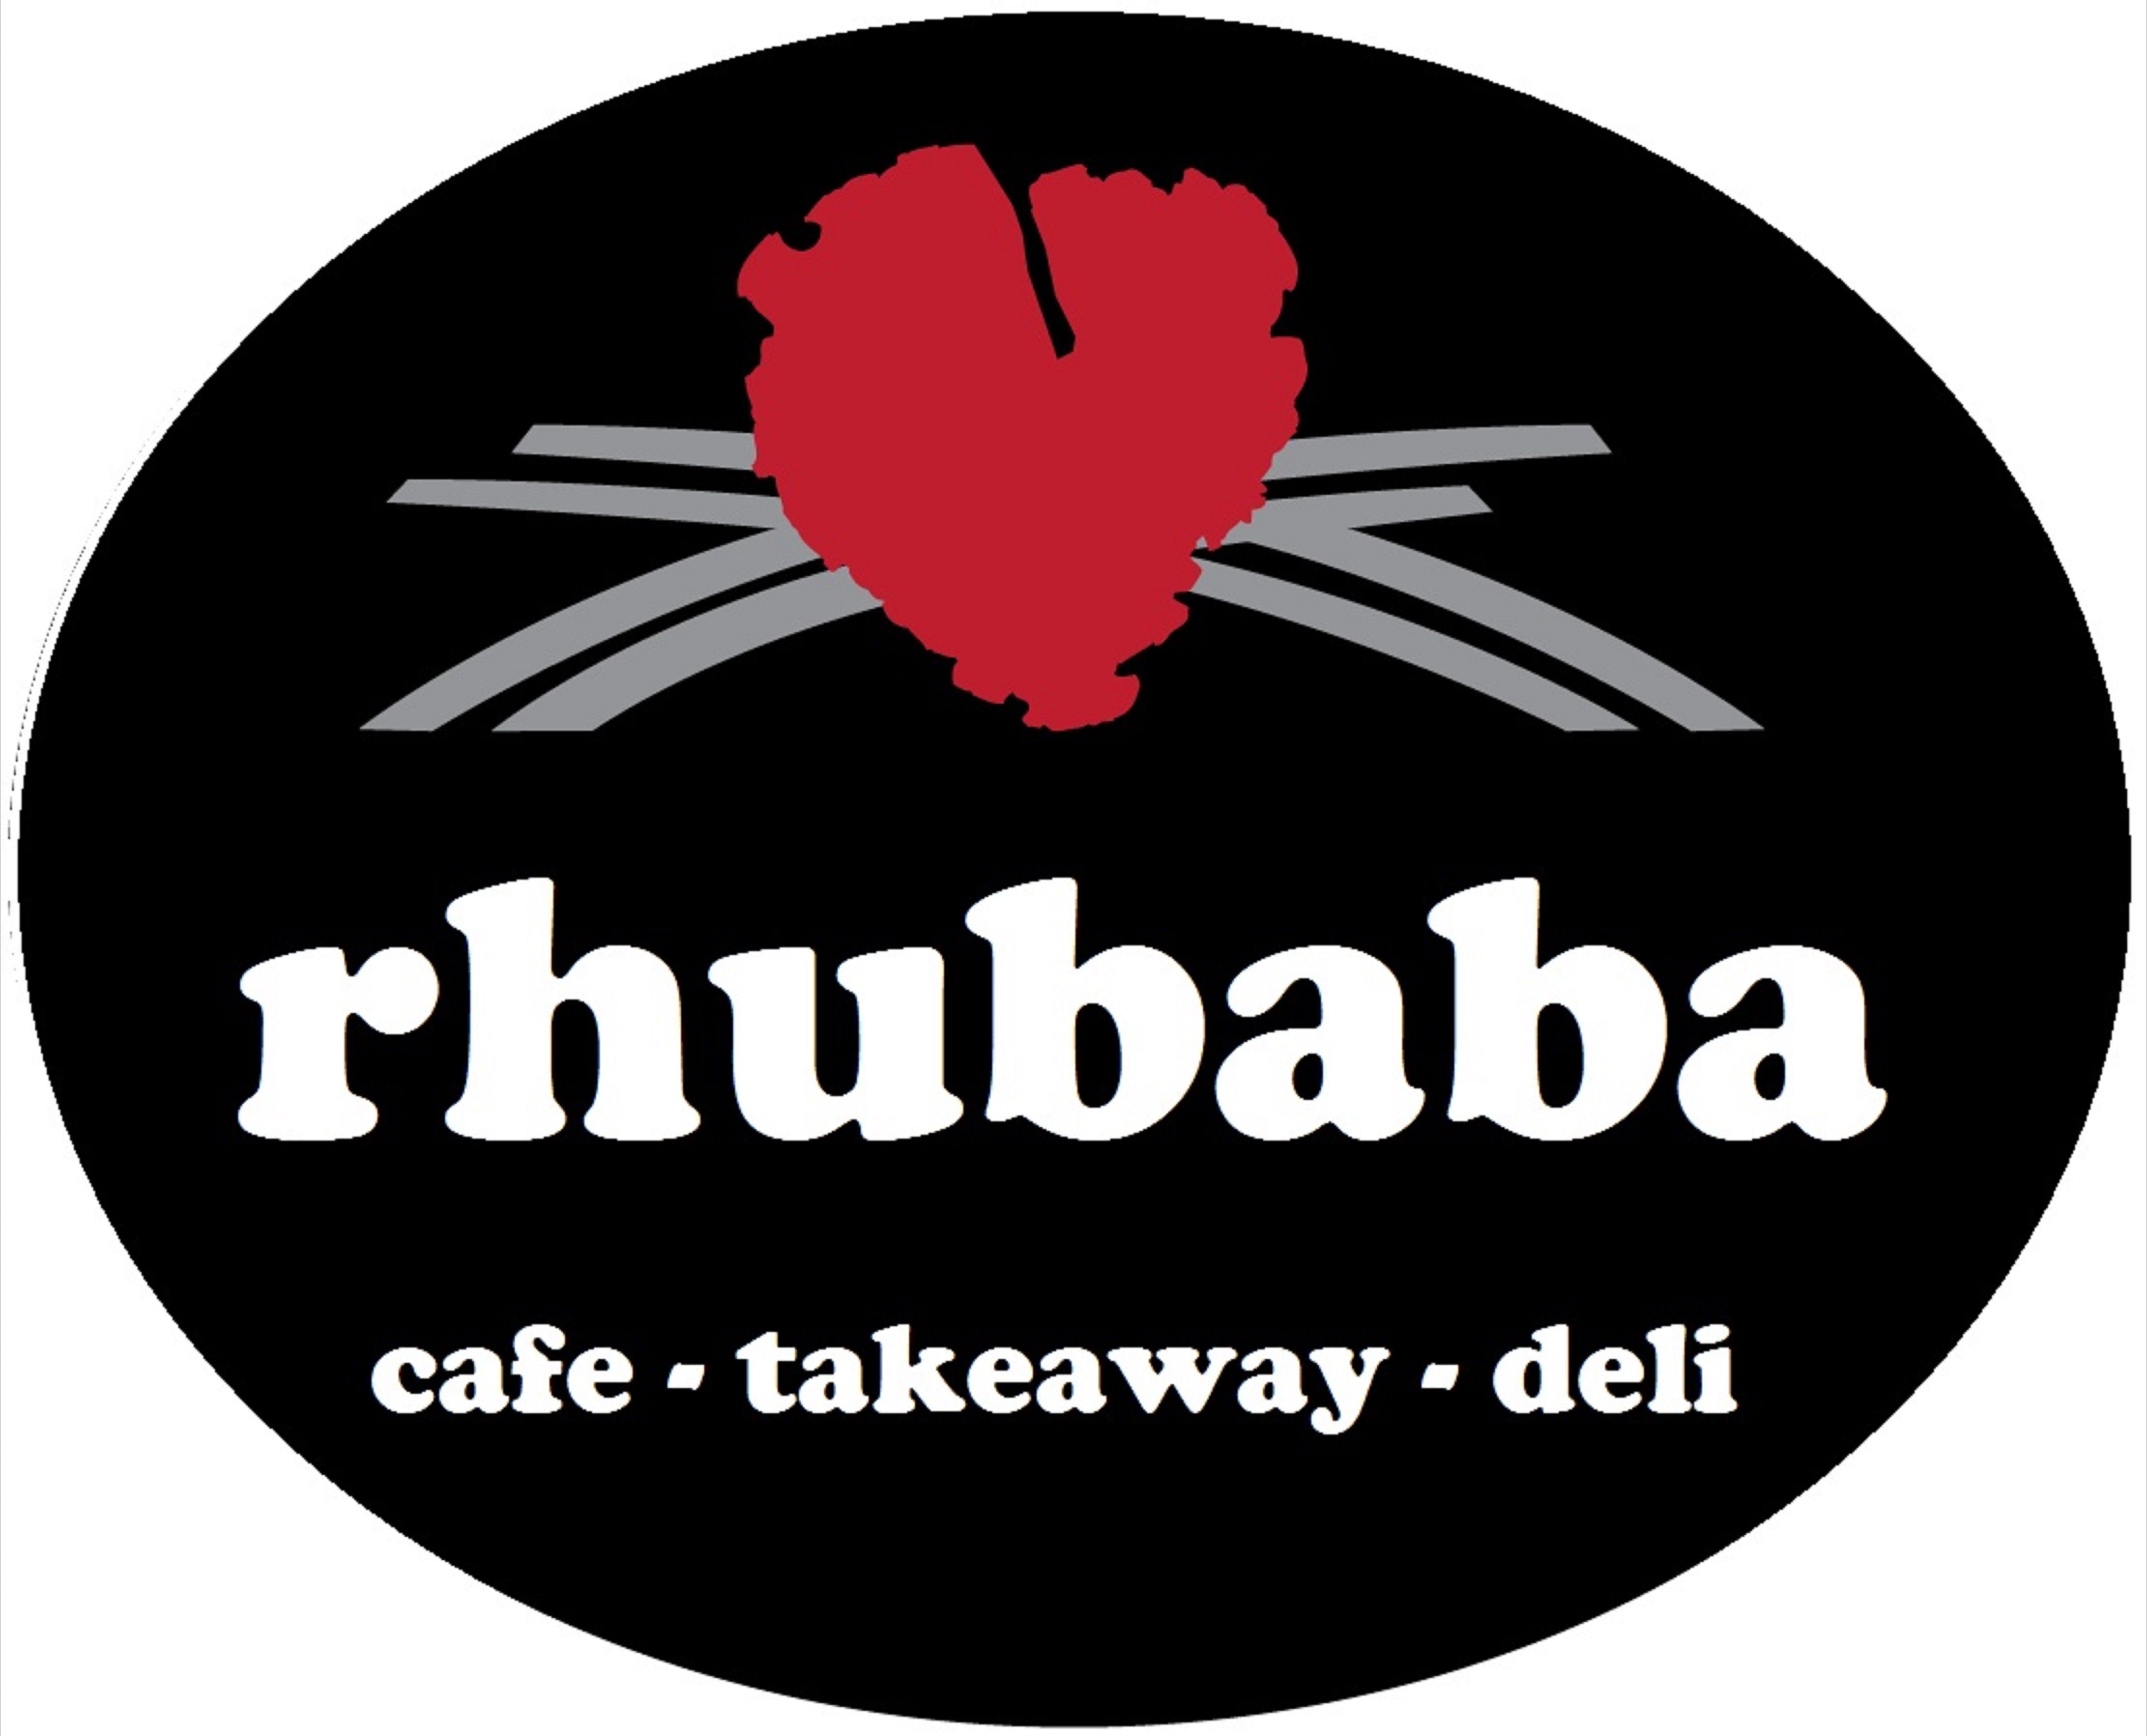 House of Rhubarb - Find Attractions